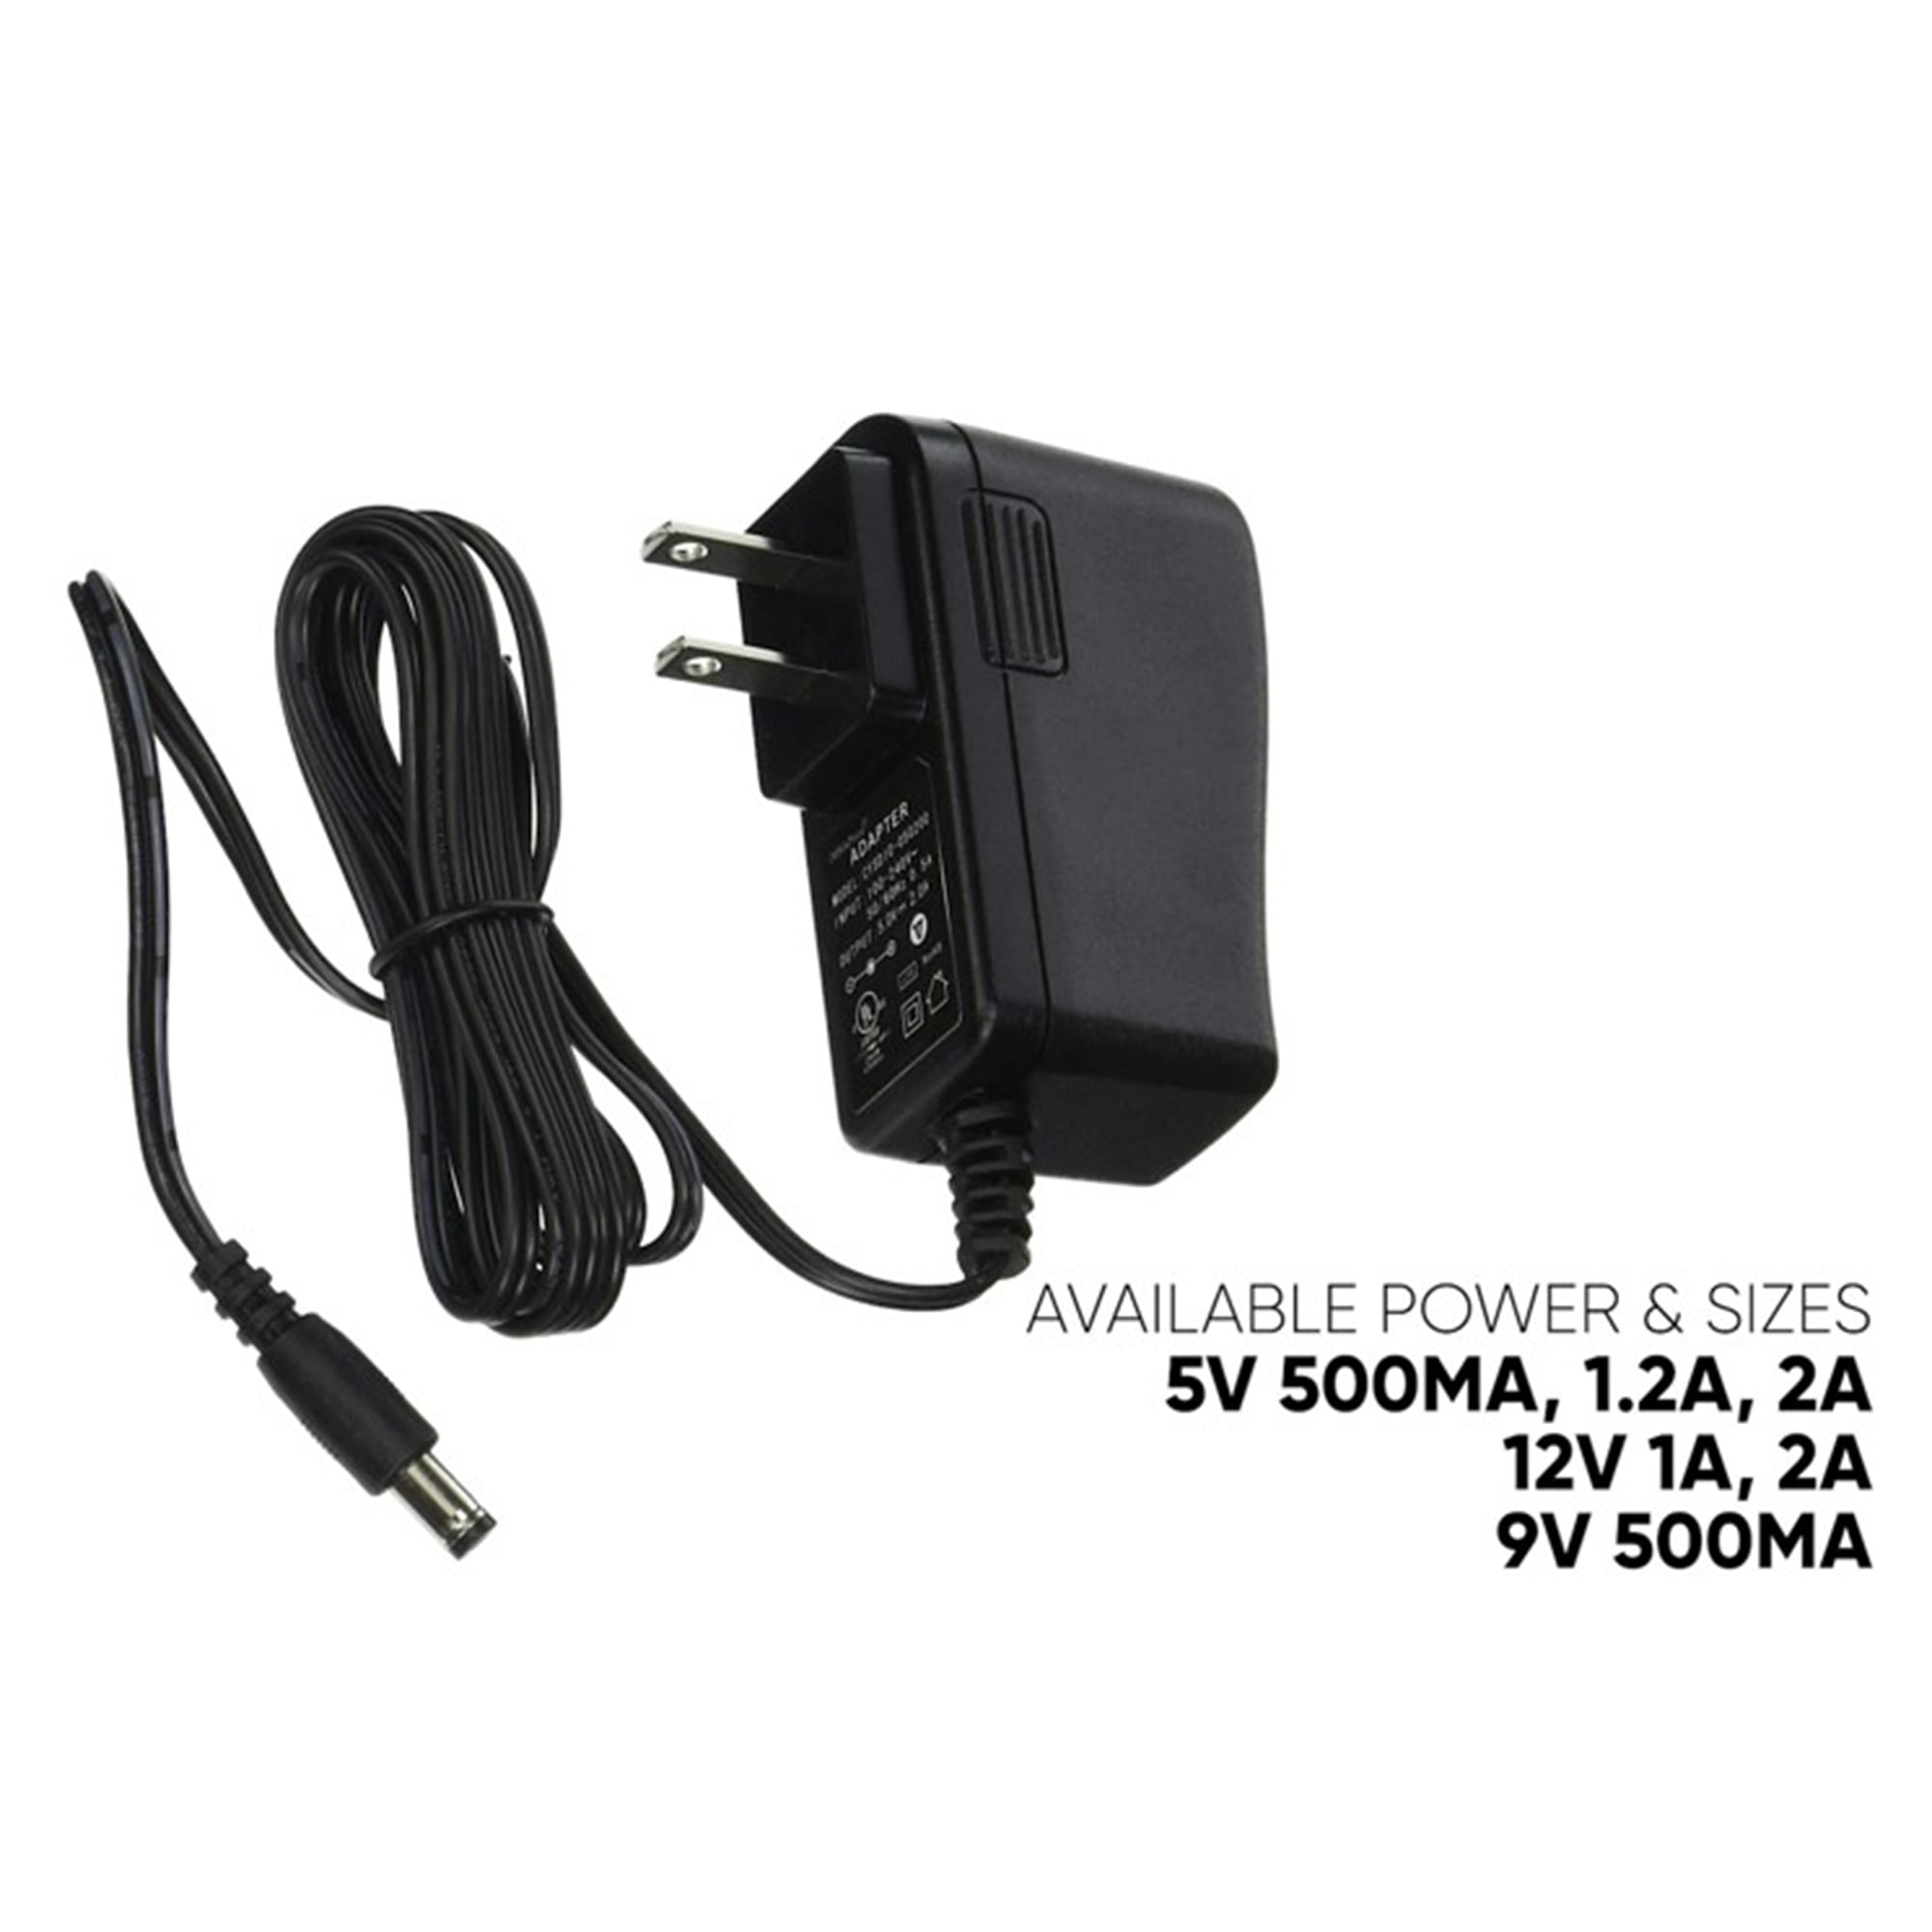 5V 2A (2000mA) switching power supply - UL Listed : ID 276 : $7.95 :  Adafruit Industries, Unique & fun DIY electronics and kits